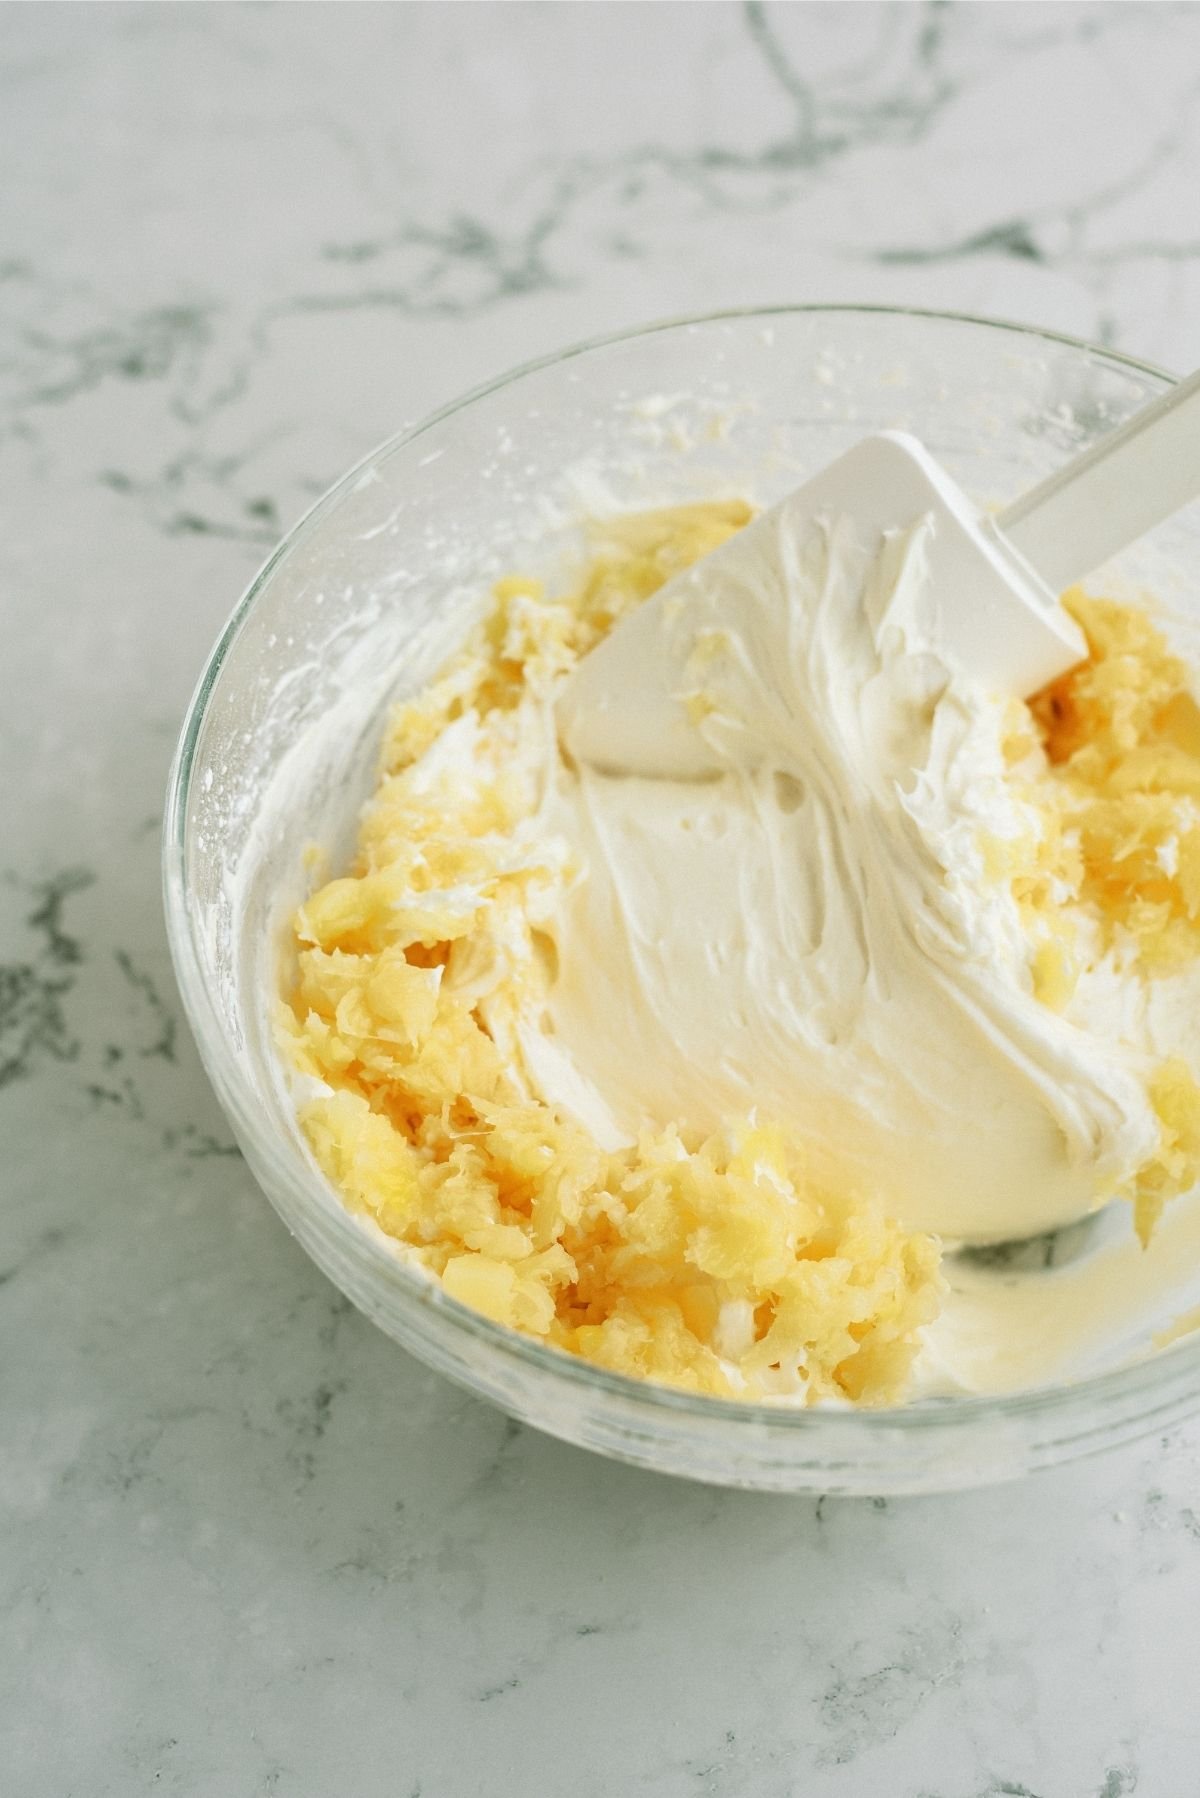 crushed pineapple added to cream cheese mixture in glass bowl